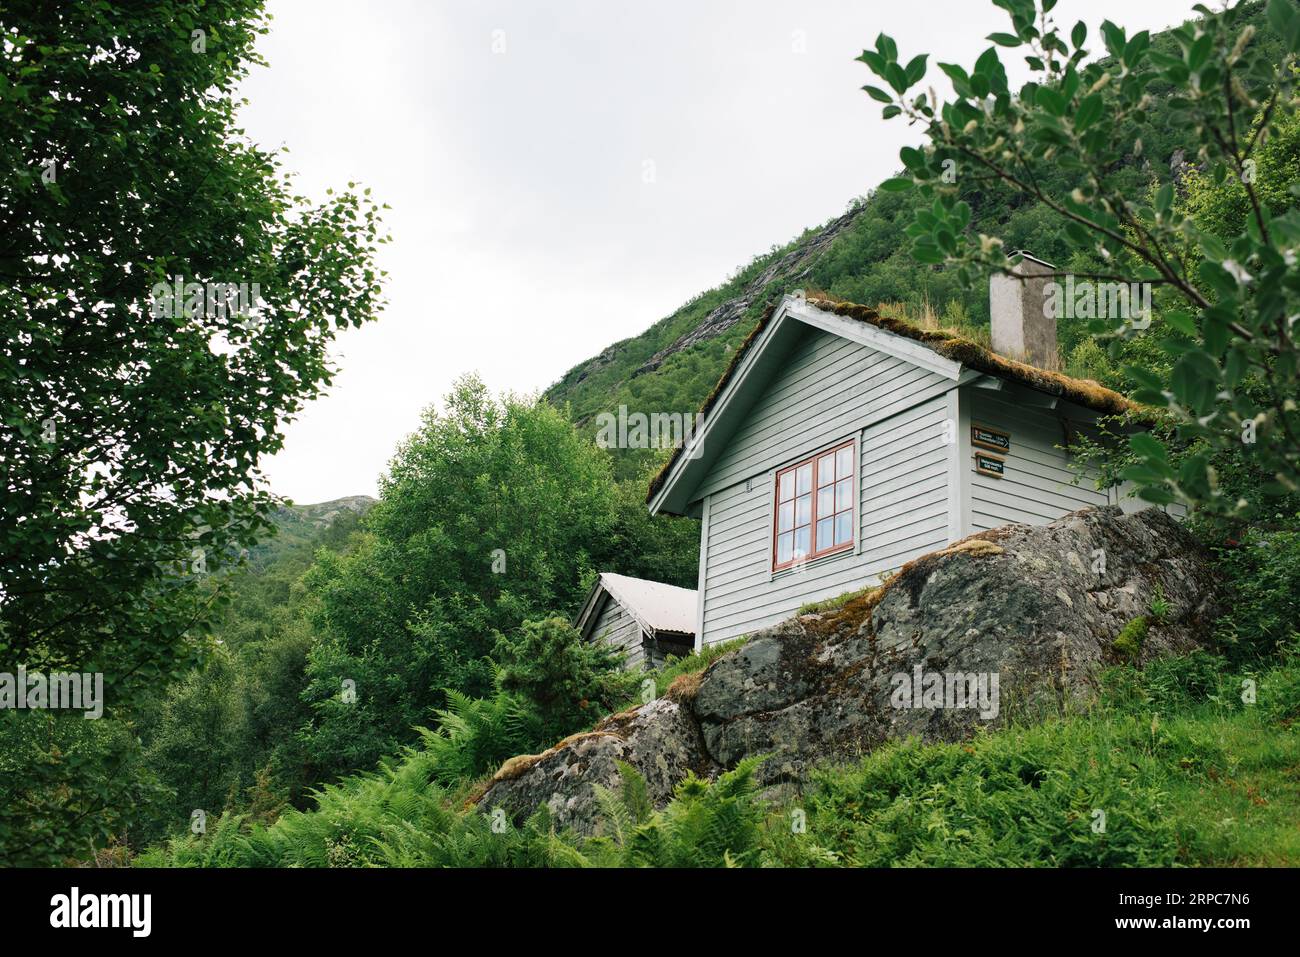 Norwegian wooden cabin in the mountains Stock Photo